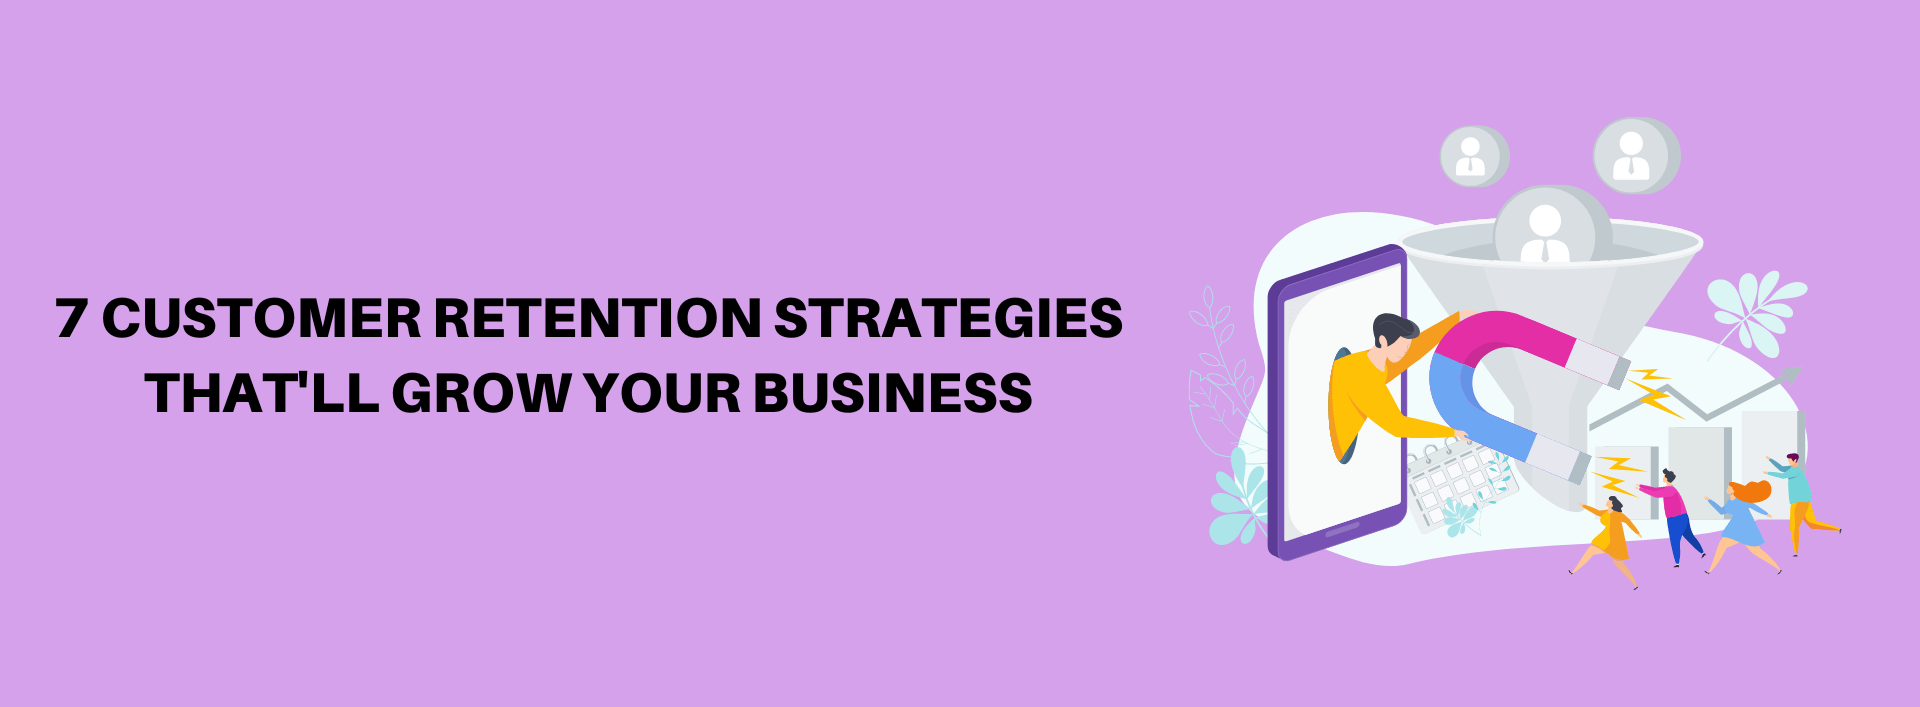 7 Customer Retention Strategies That’ll Grow Your Business